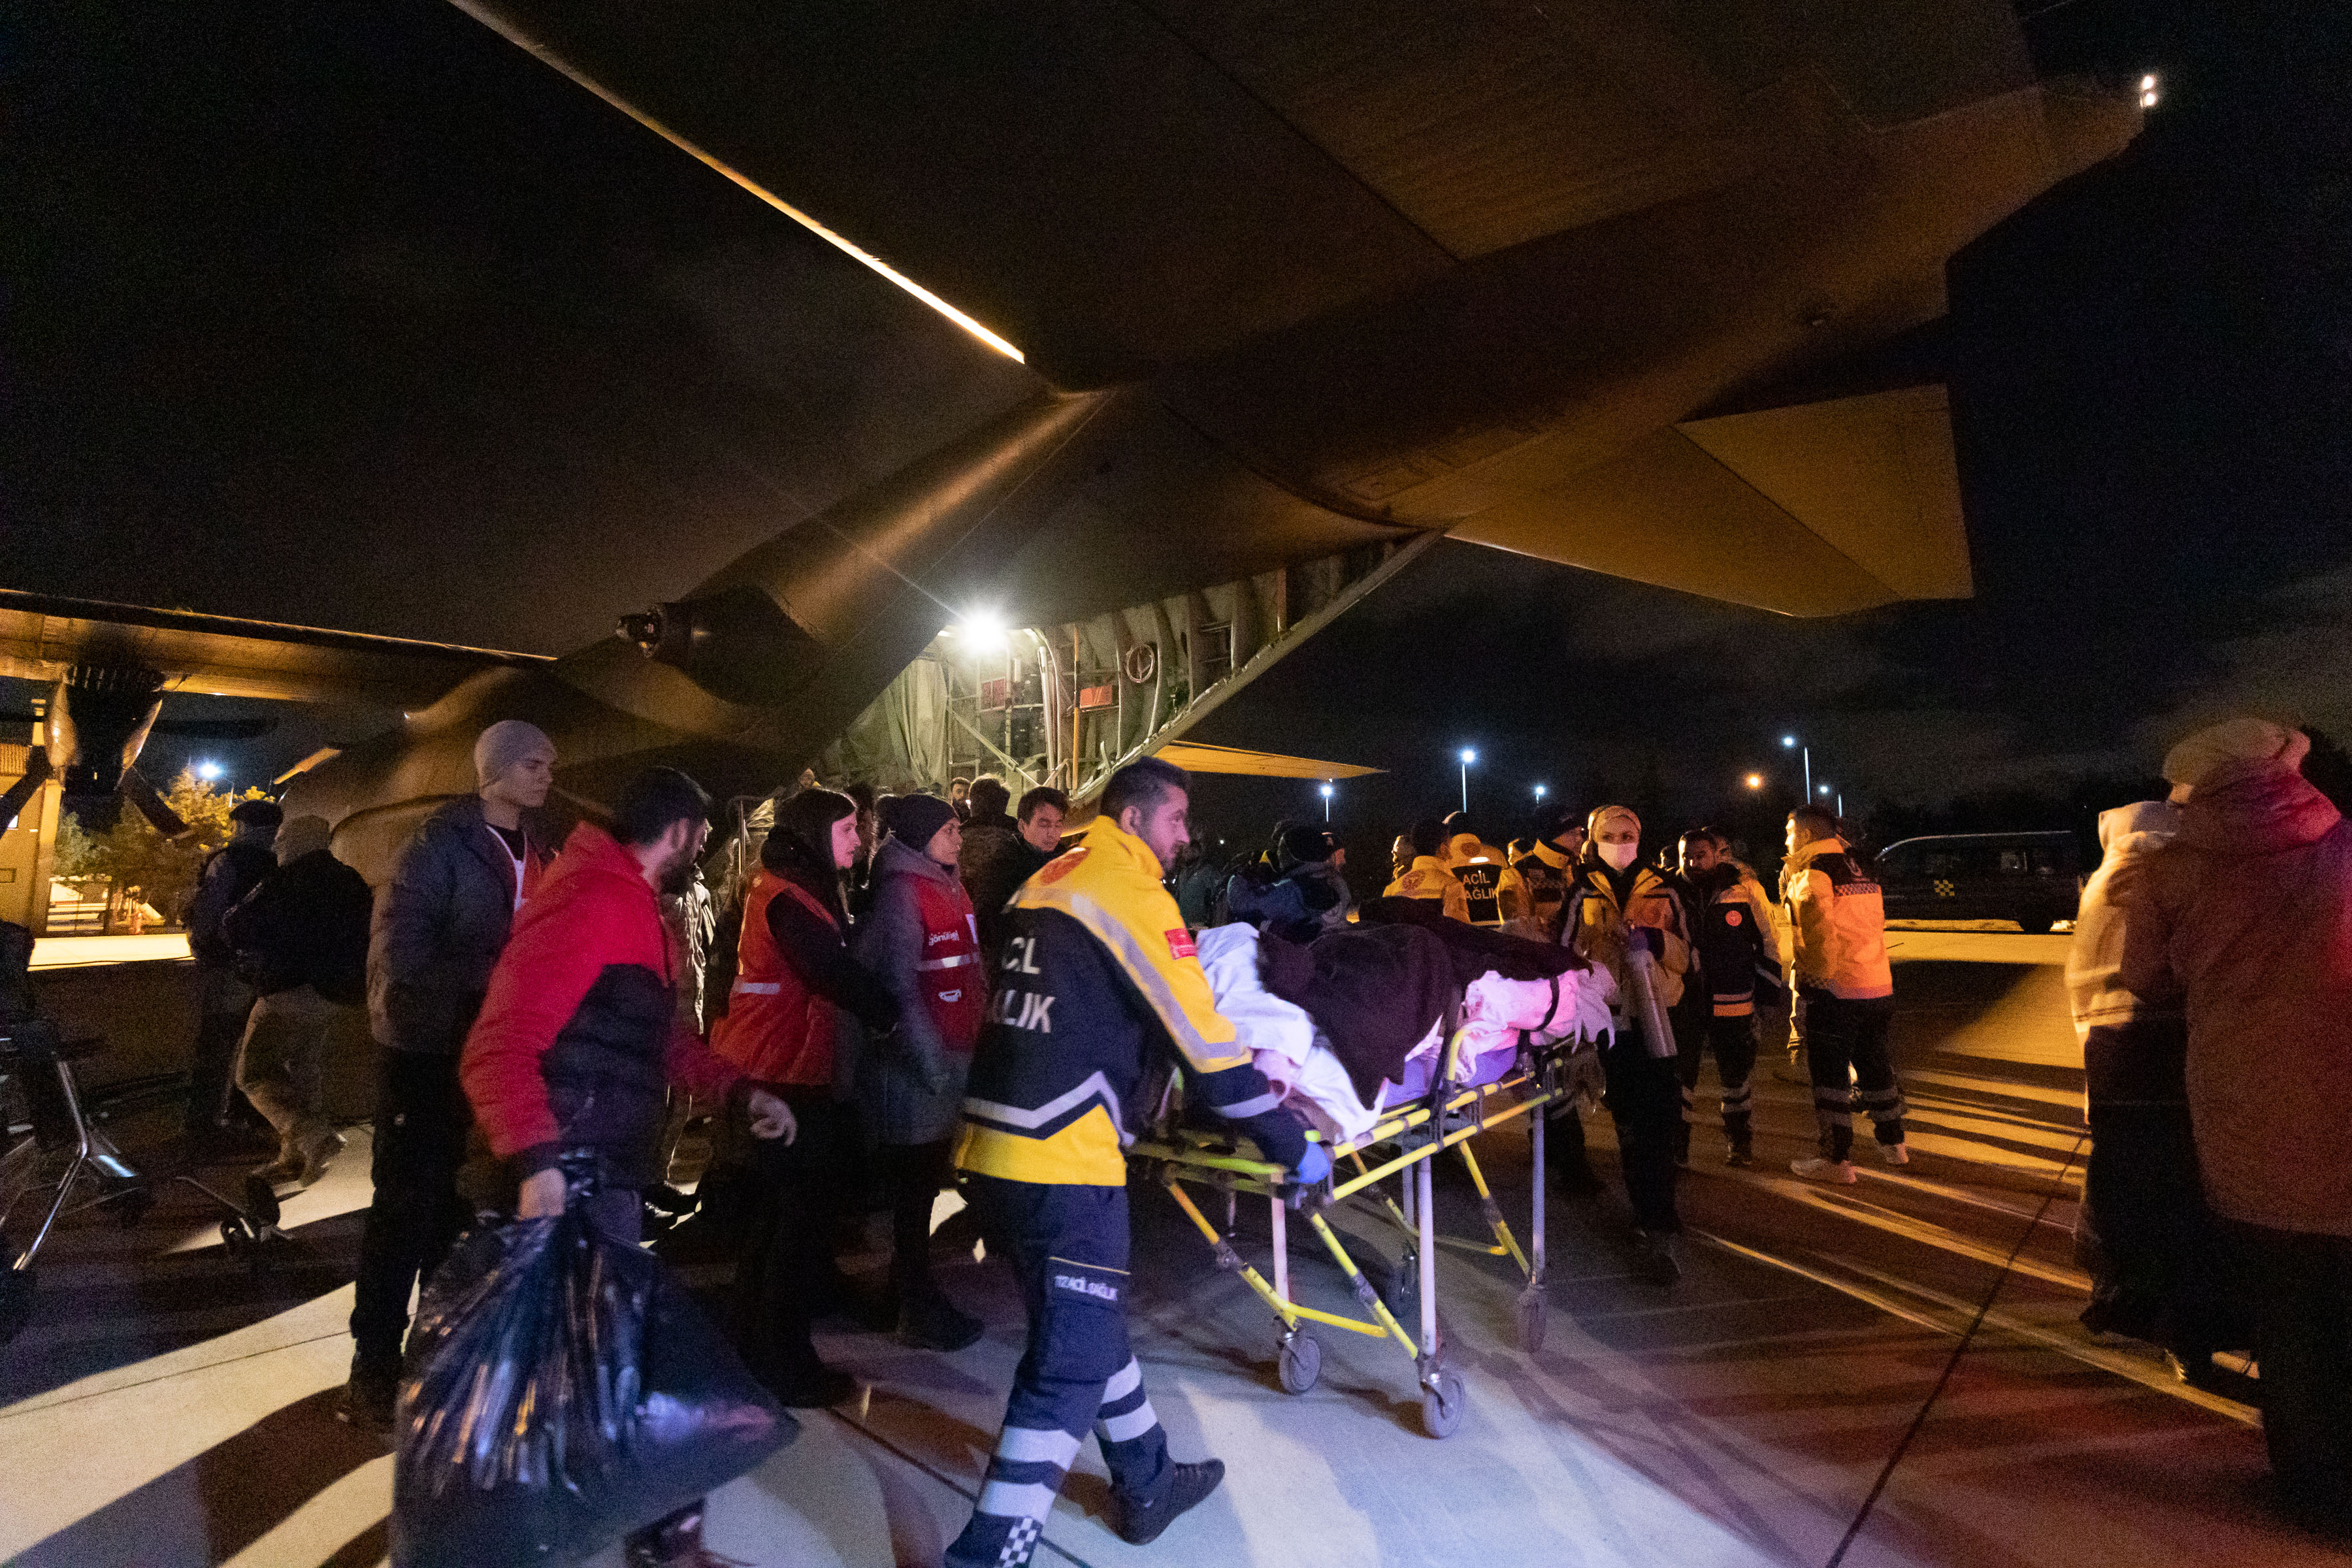 Image shows RAF medics attending patient on the airfield by RAF Hercules aircraft.